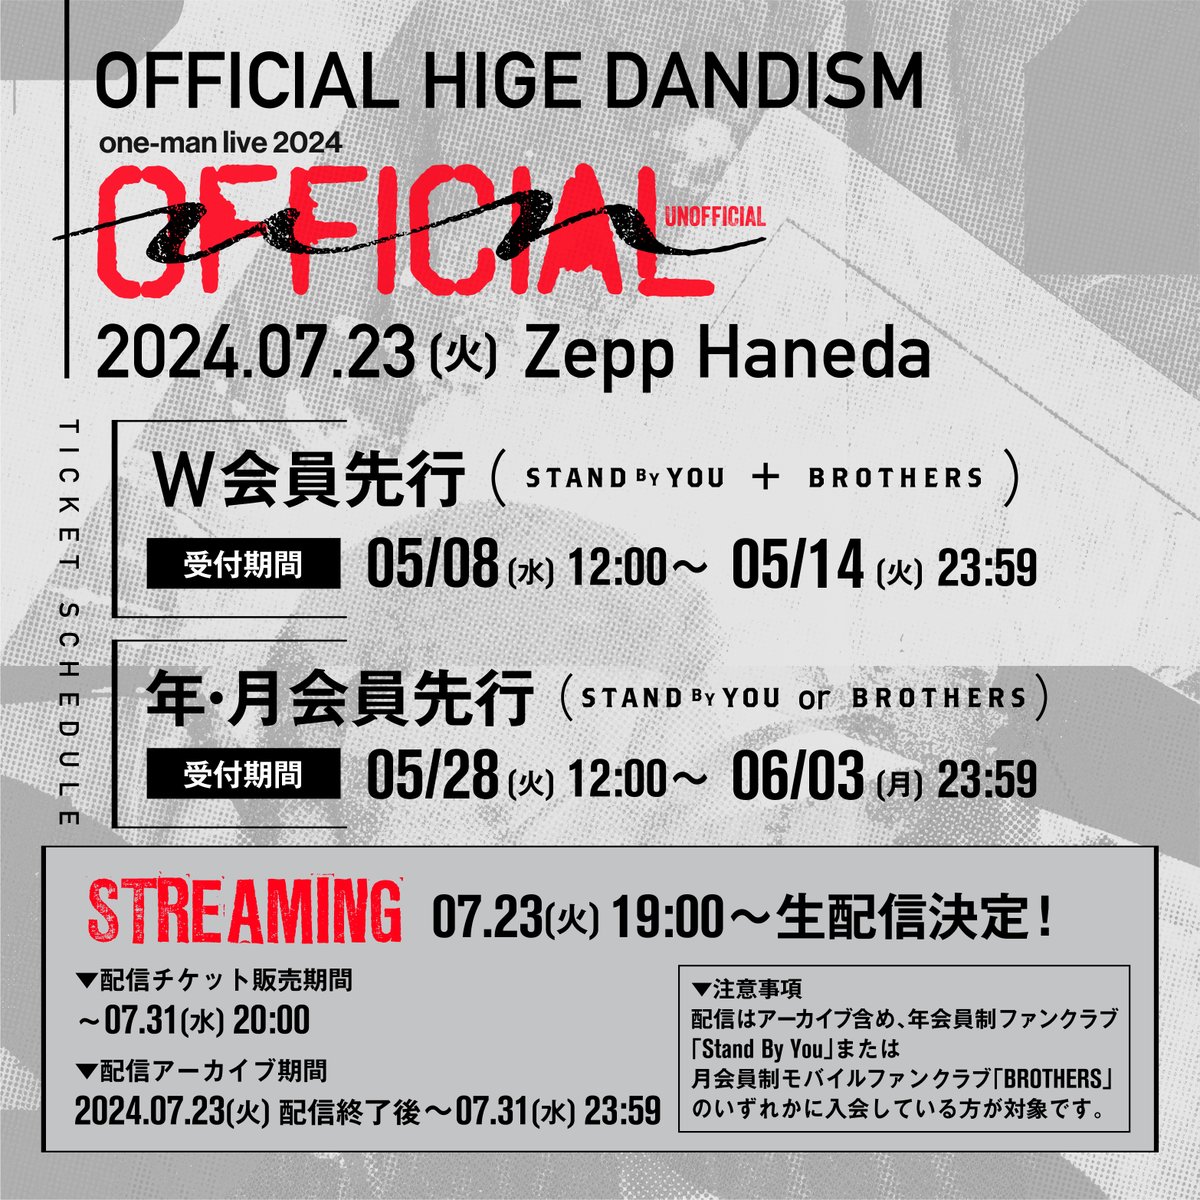 OFFICIAL HIGE DANDISM
one-man live 2024 -UNOFFICIAL-

W会員先行受付は
本日5/14(火) 23:59まで⚠️

▼チケットのお申し込みはこちら
tixplus.jp/feature/higeda…

▼配信チケット発売中🎥
cdn.tixplus.jp/feature/higeda…

#ヒゲダンアンオフィシャル